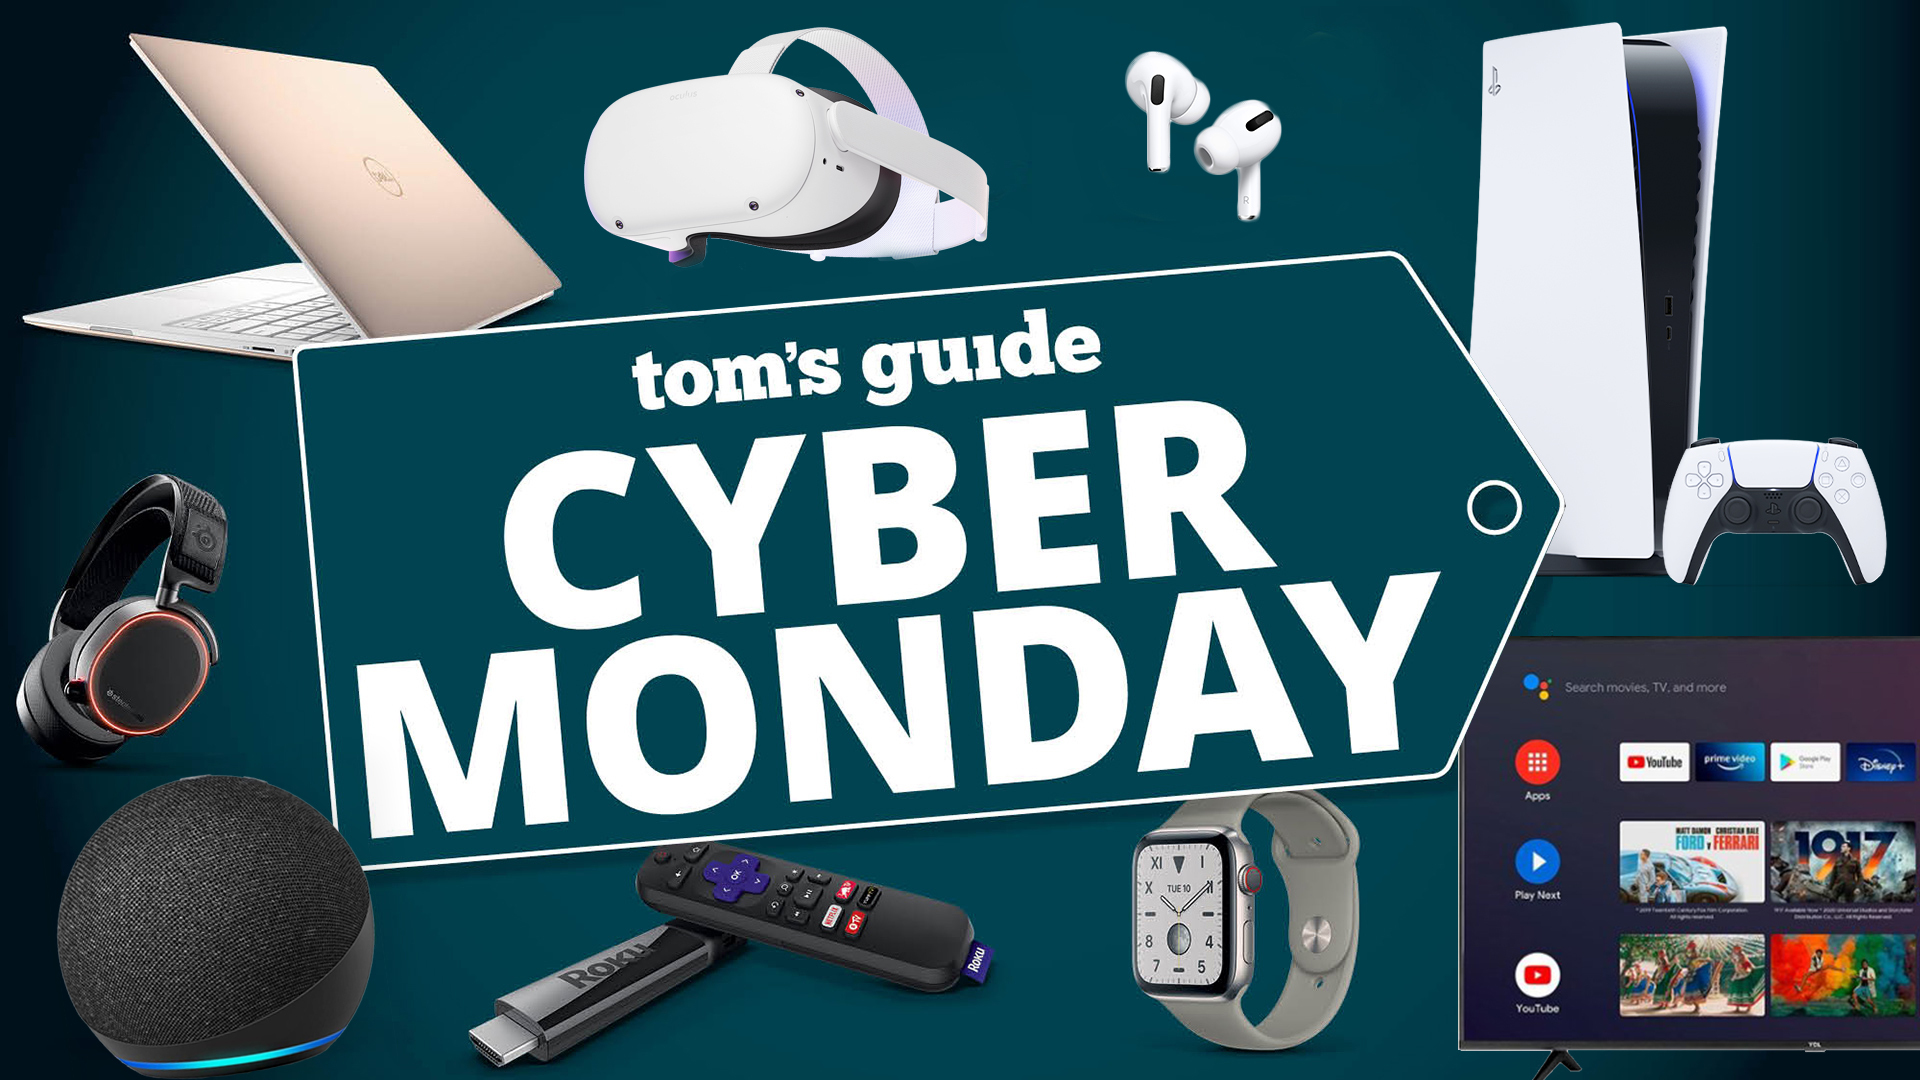 What To Expect On Cyber Monday In 2021